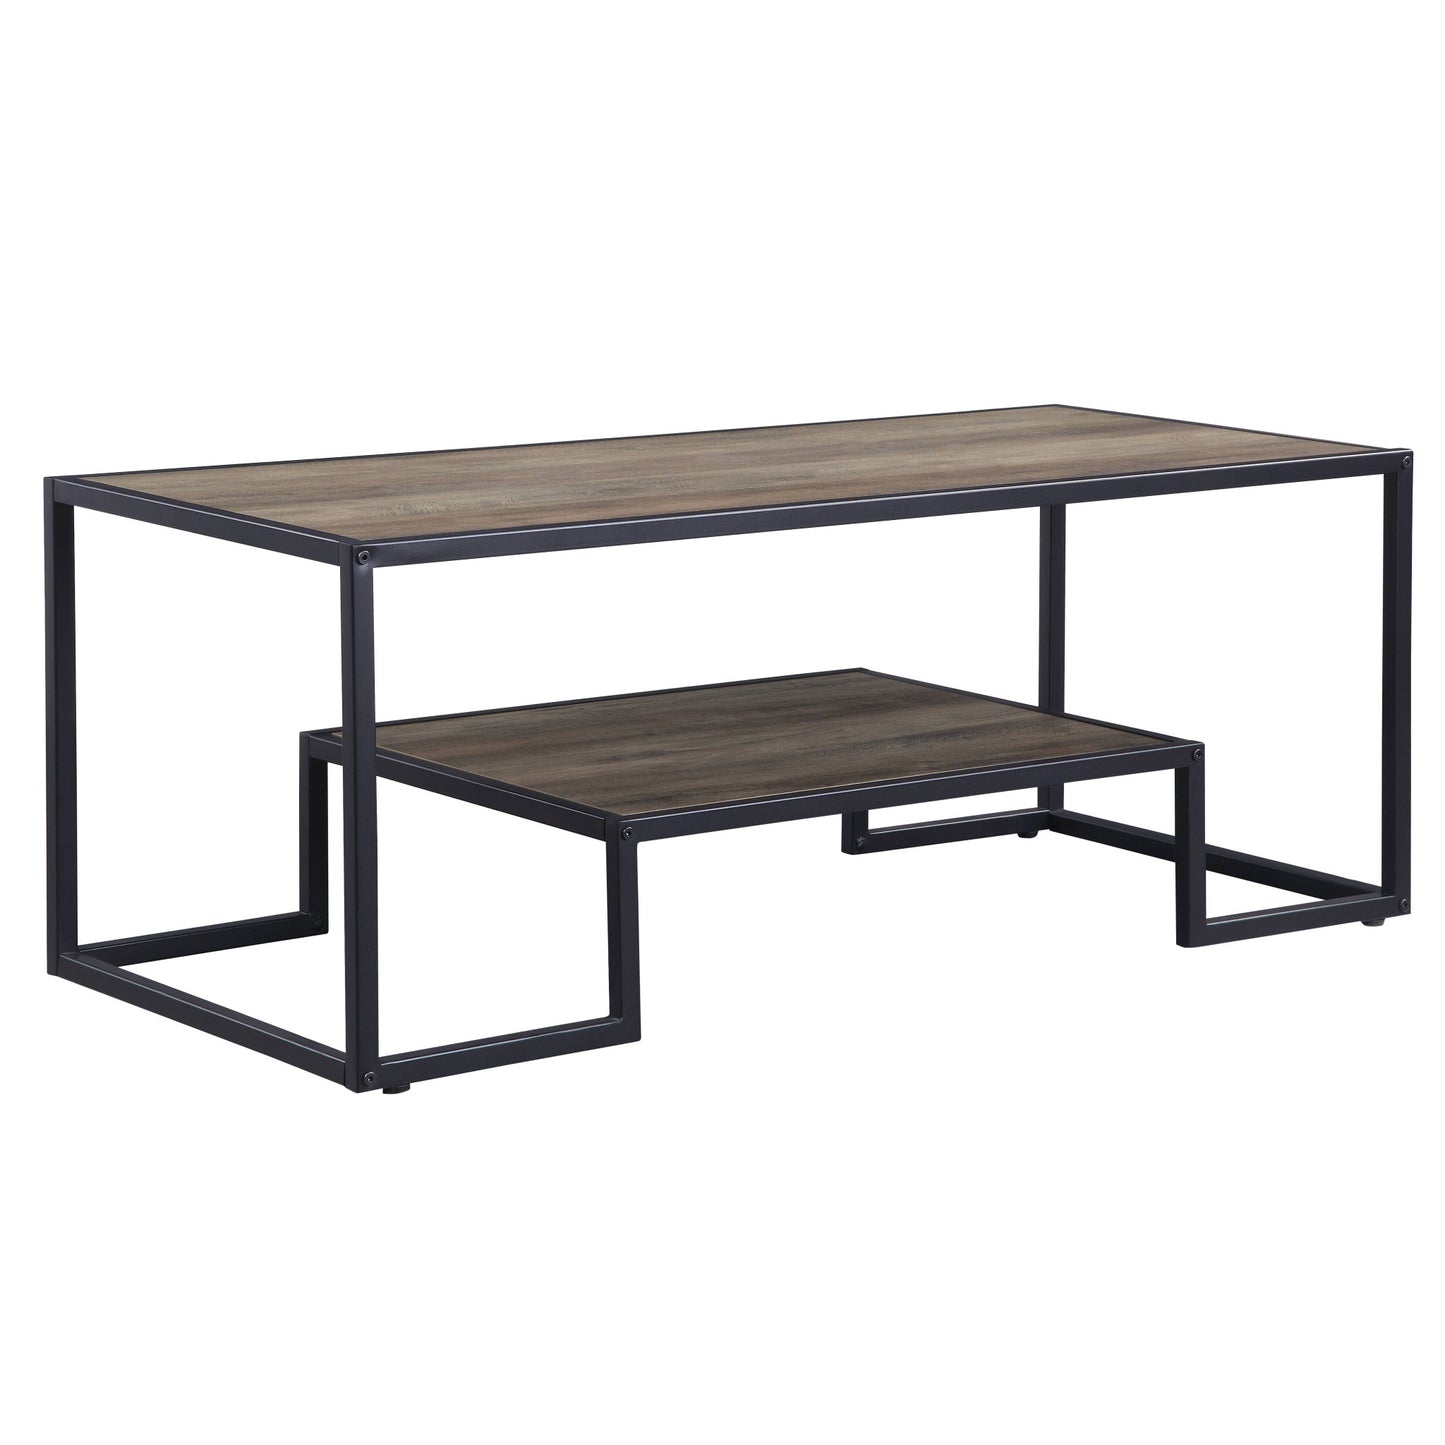 45" Black And Rustic Oak Paper Veneer And Metal Rectangular Coffee Table With Shelf By Homeroots